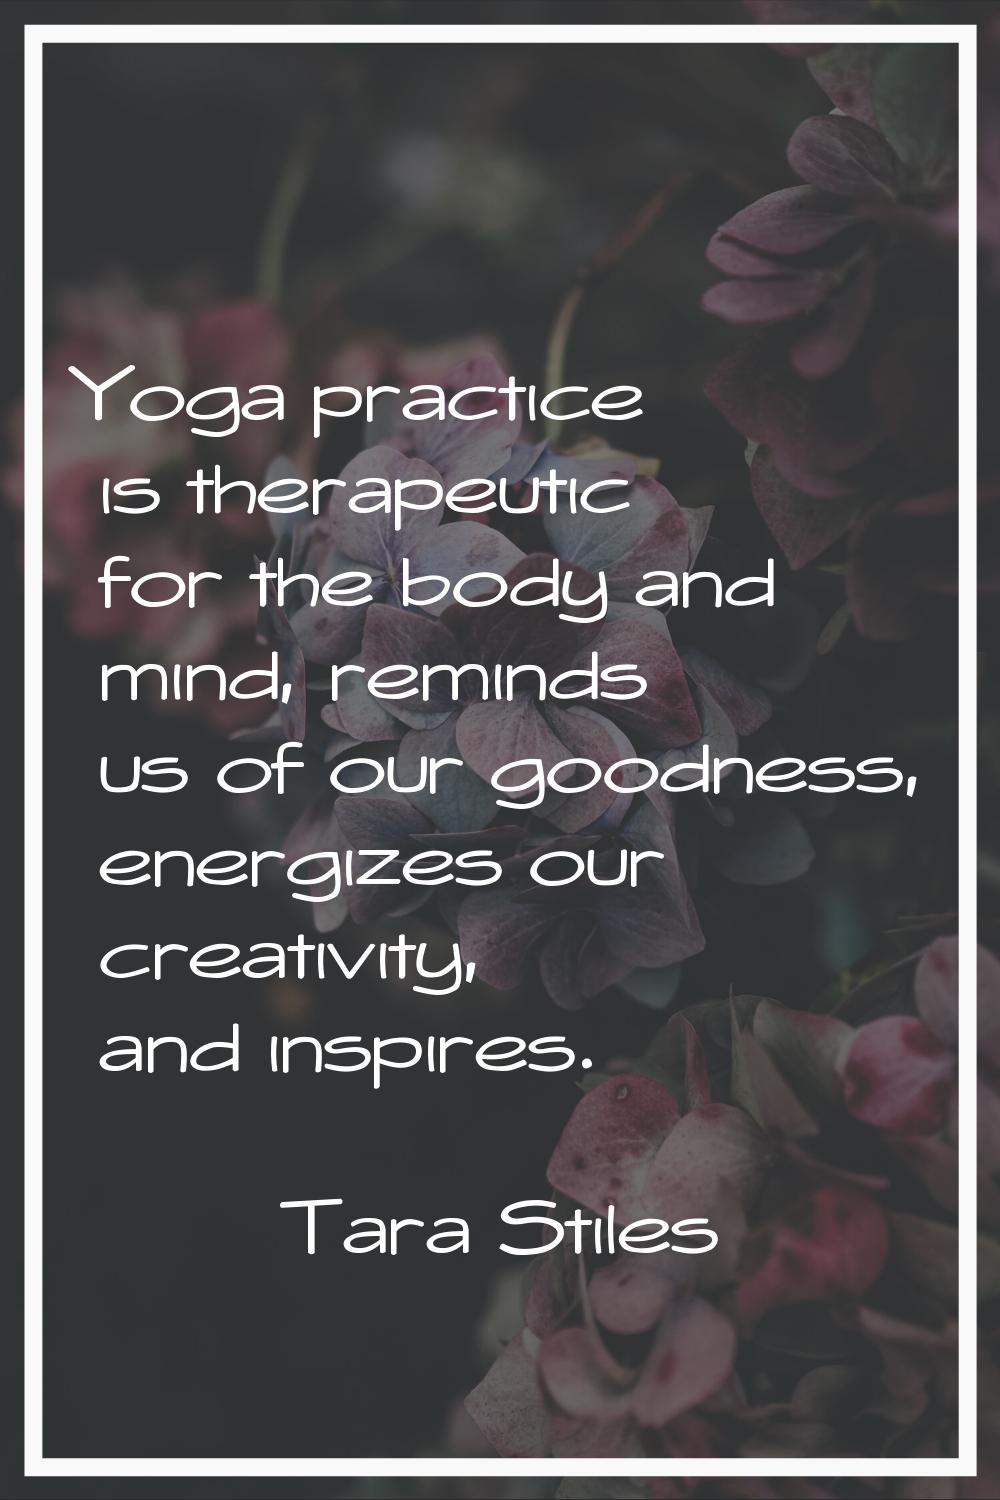 Yoga practice is therapeutic for the body and mind, reminds us of our goodness, energizes our creat